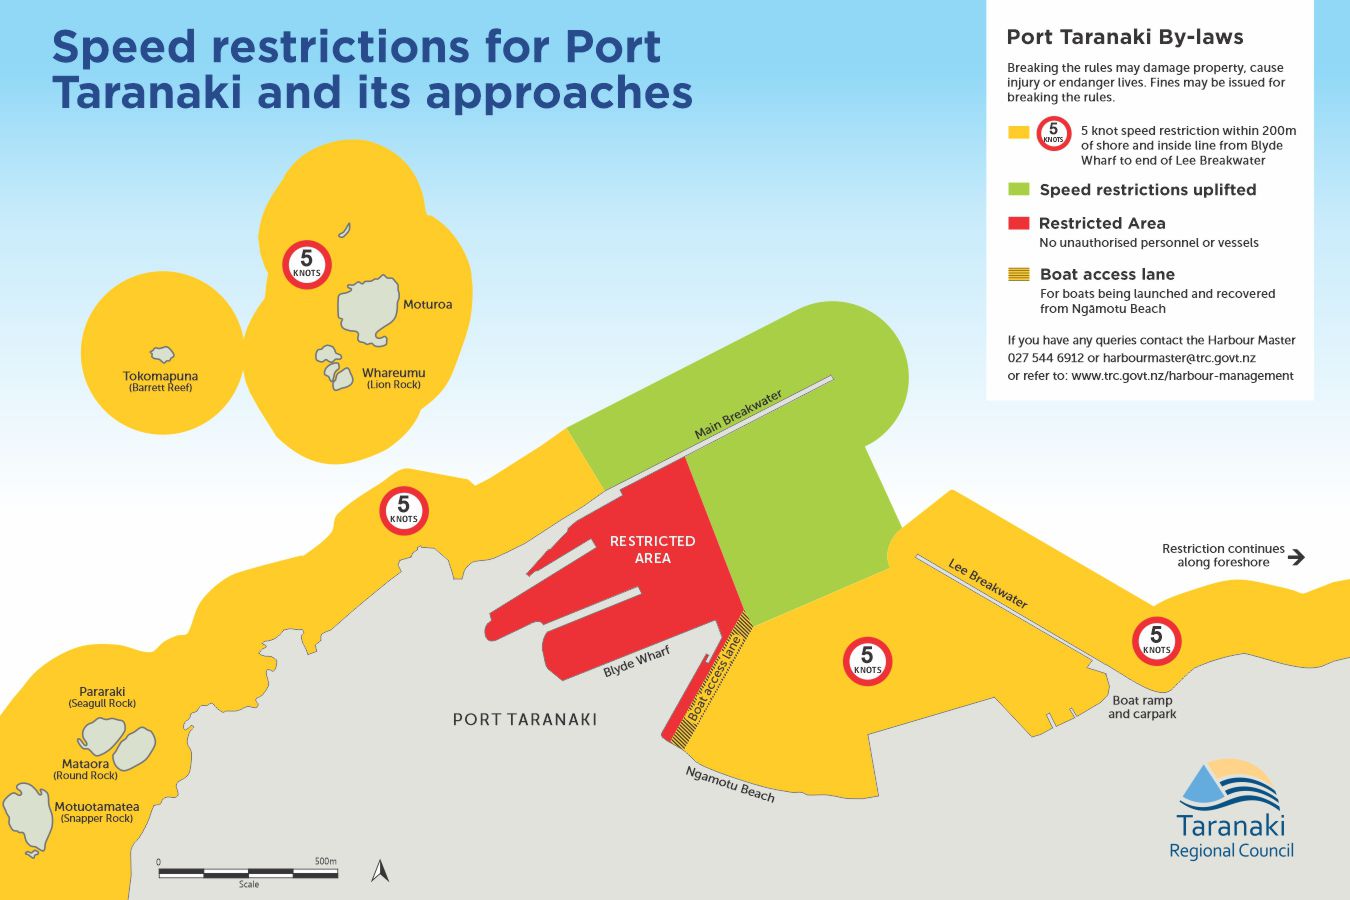 Speed restrictions at Port Taranaki and approaches